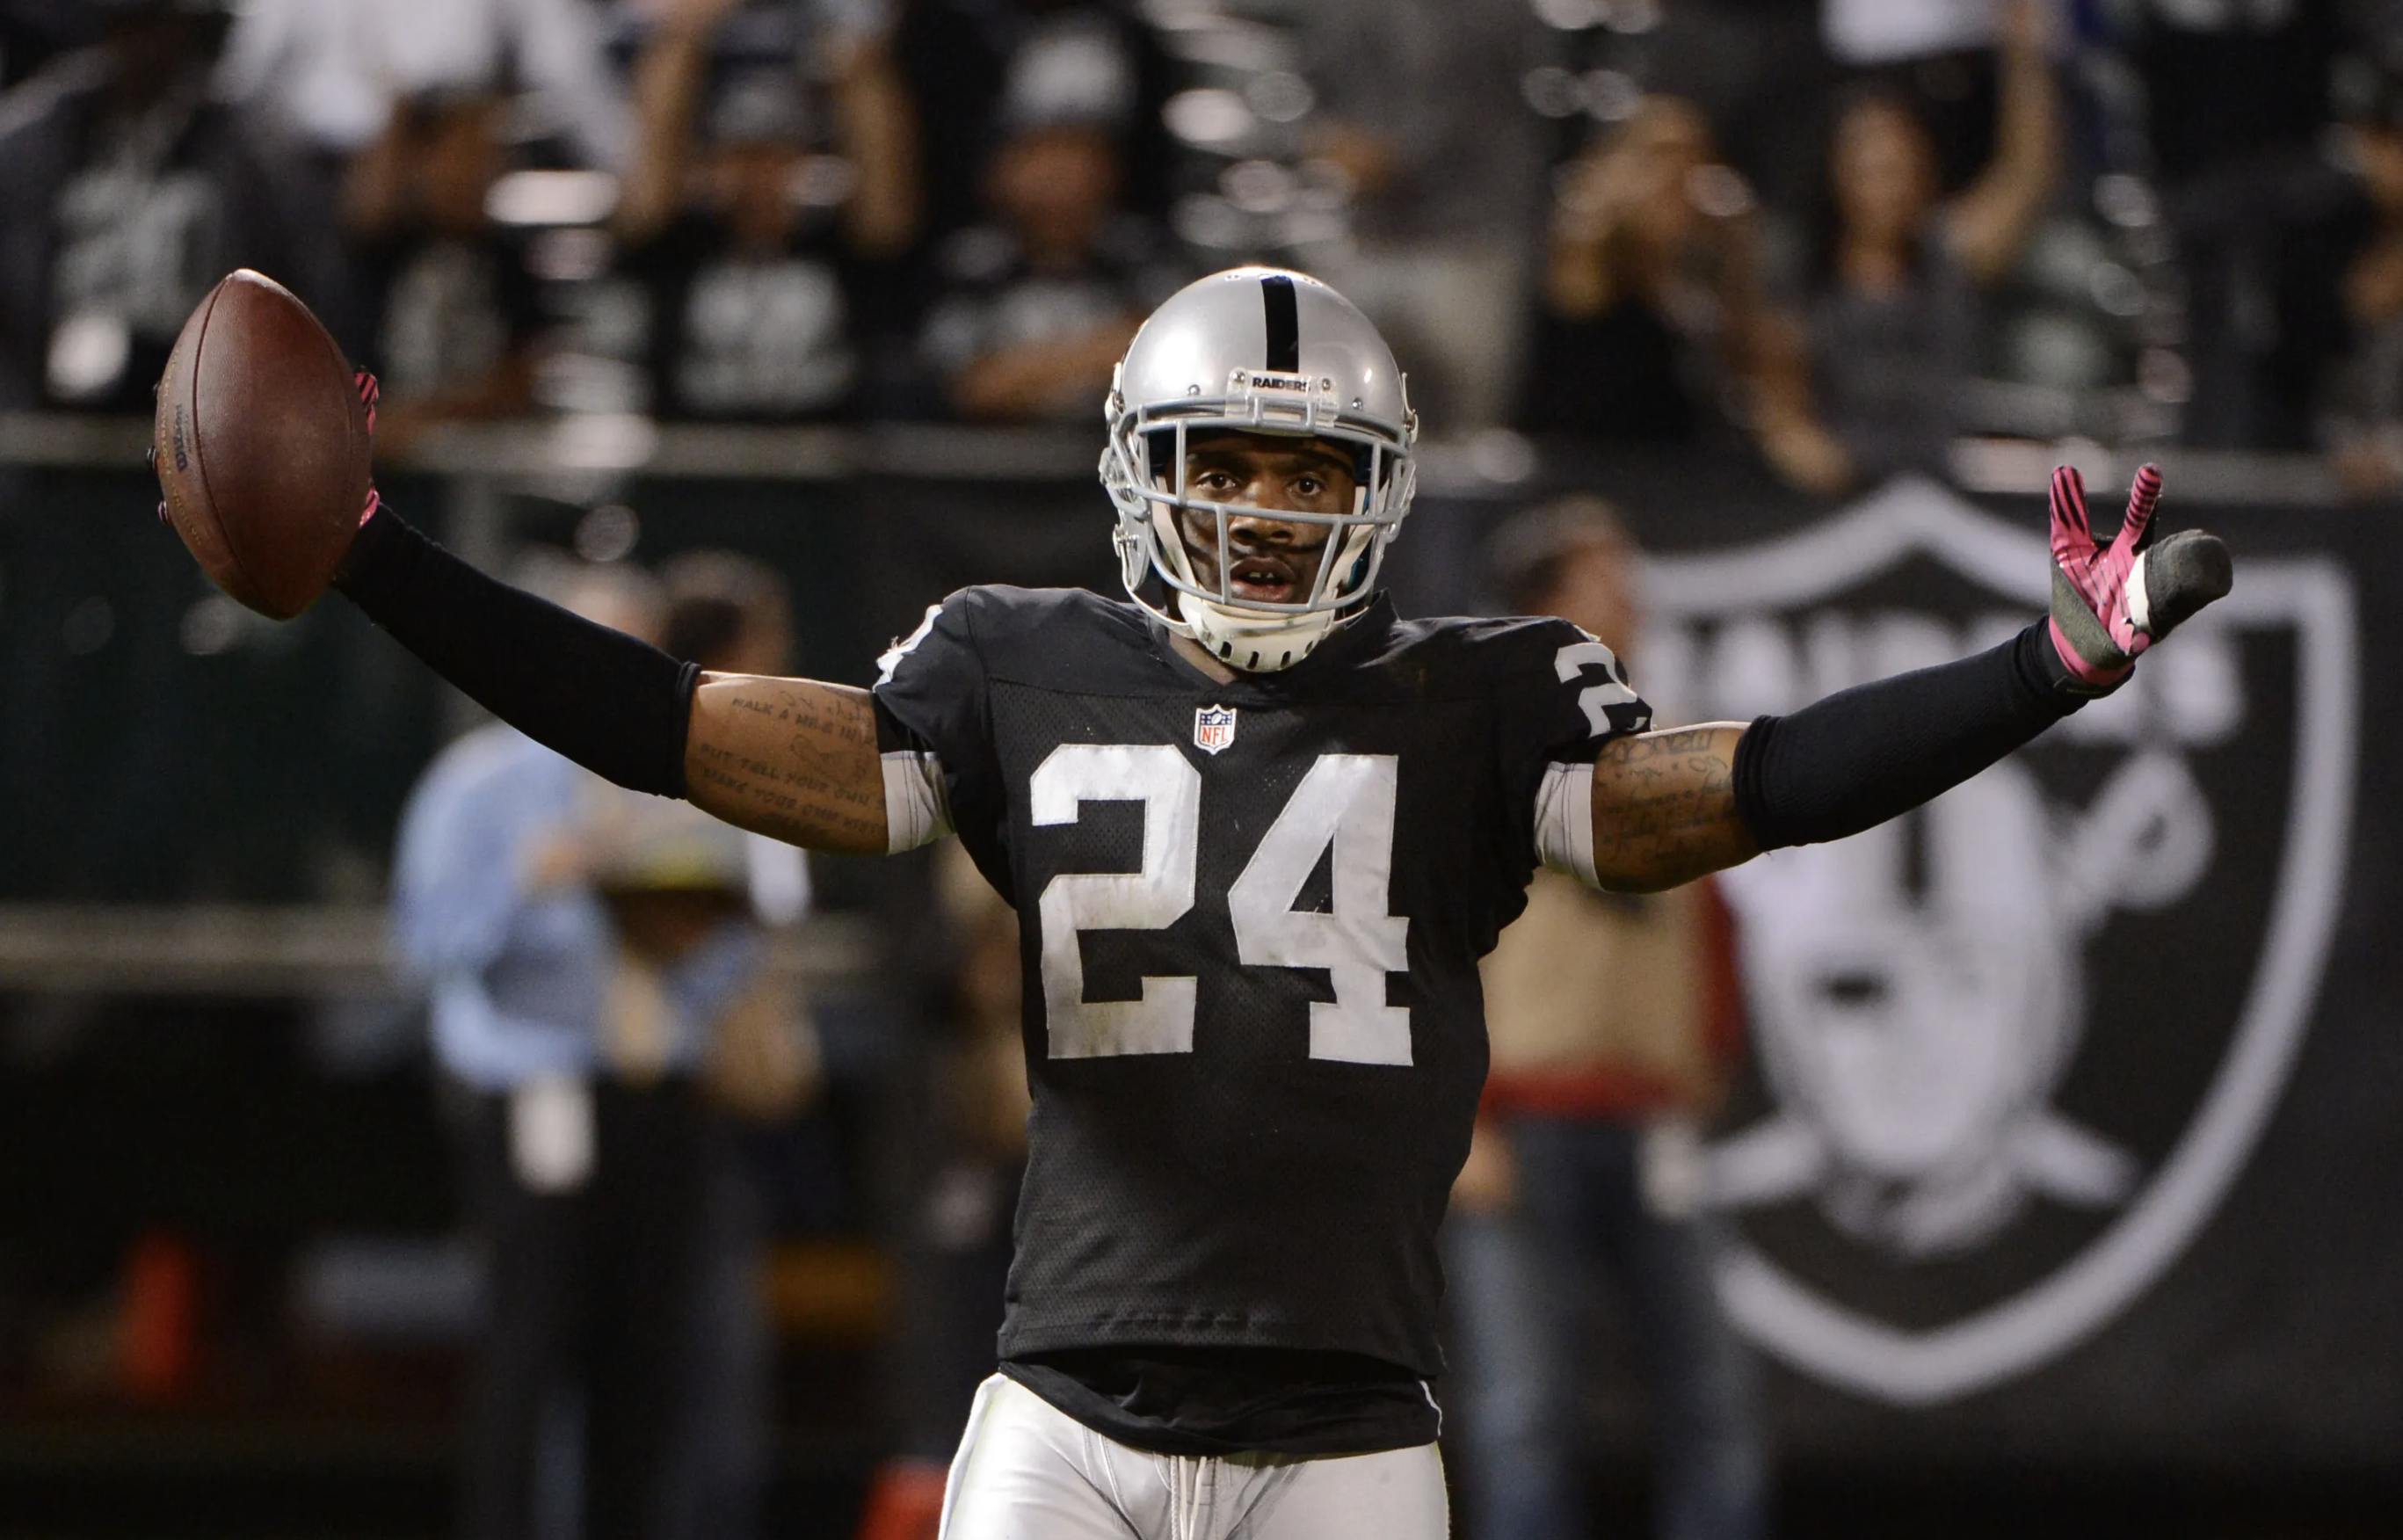 Charles Woodson, Dick Butkus among 30 enshrined in NHS Football Hall of Fame